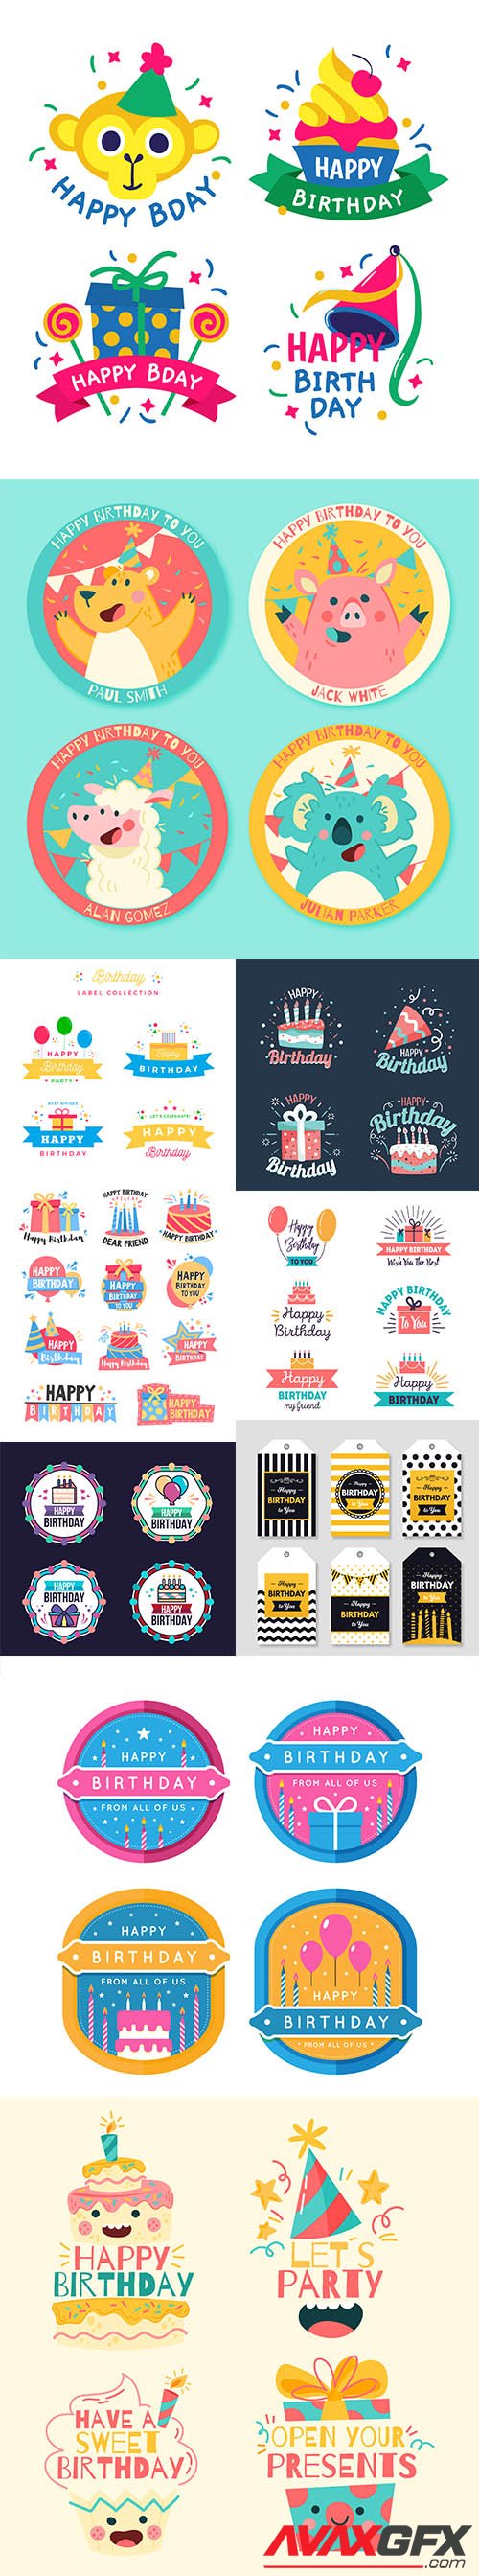 Birthday logo and badge collection